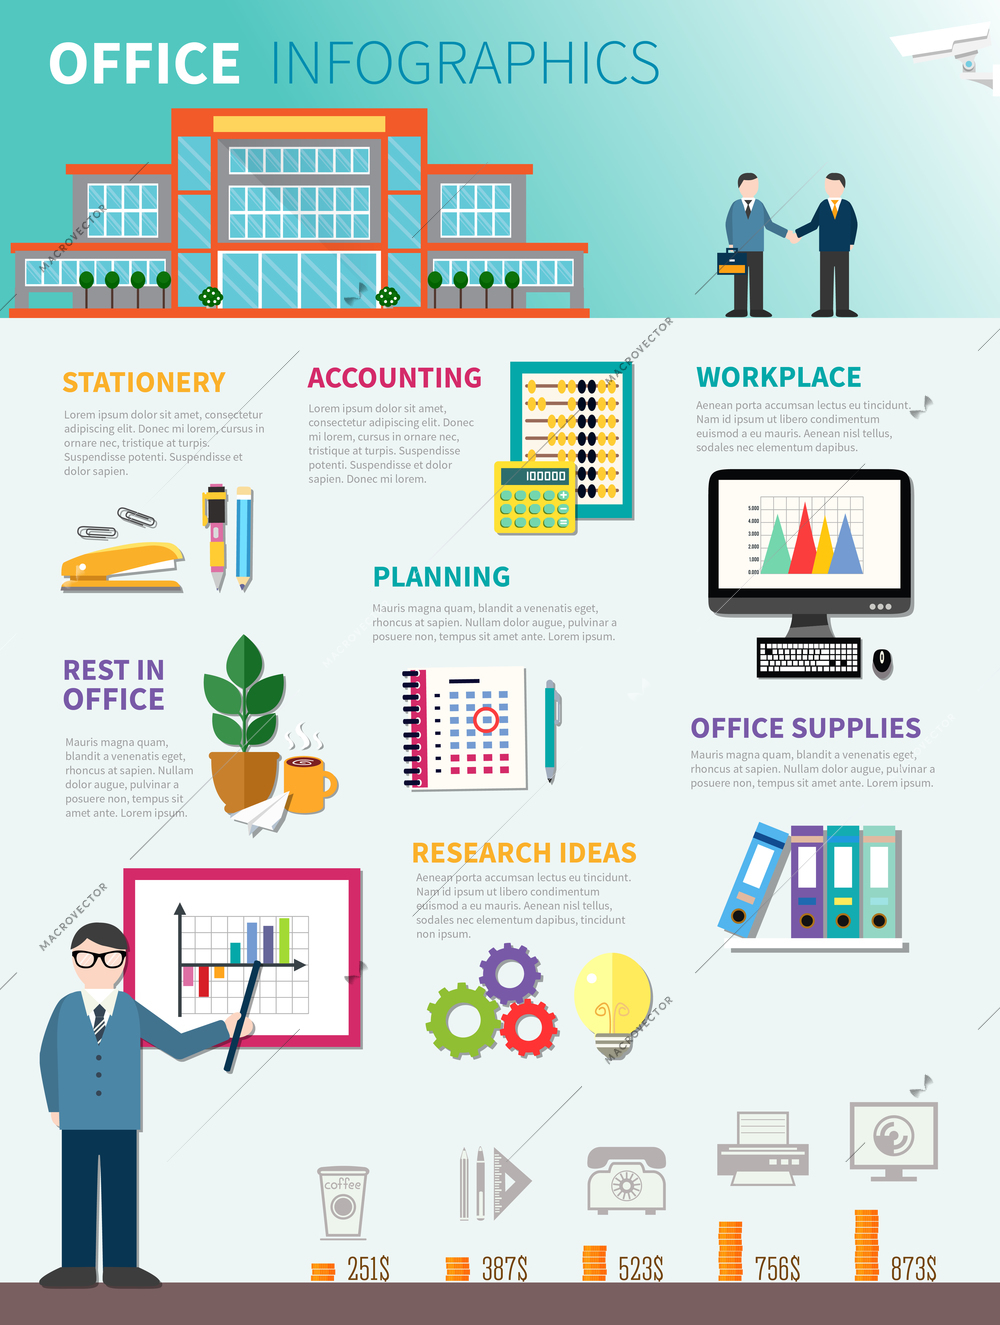 Office Infographics flat template with advertising of goods for work and rest in office vector illustration